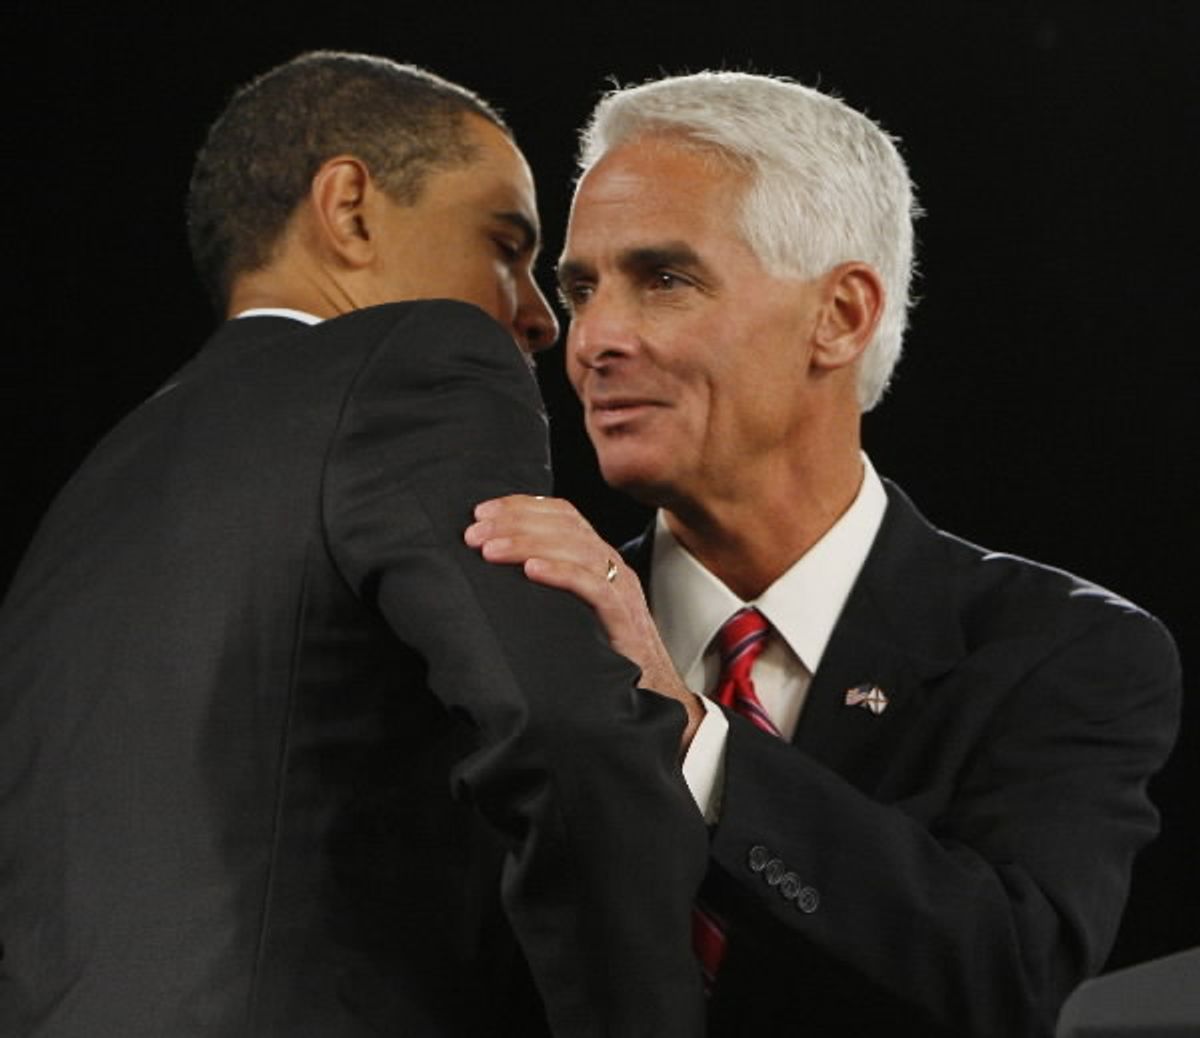 President Obama and Florida Gov. Charlie Crist embrace during a town hall meeting in Fort Myers, Fla.,  in 2009.